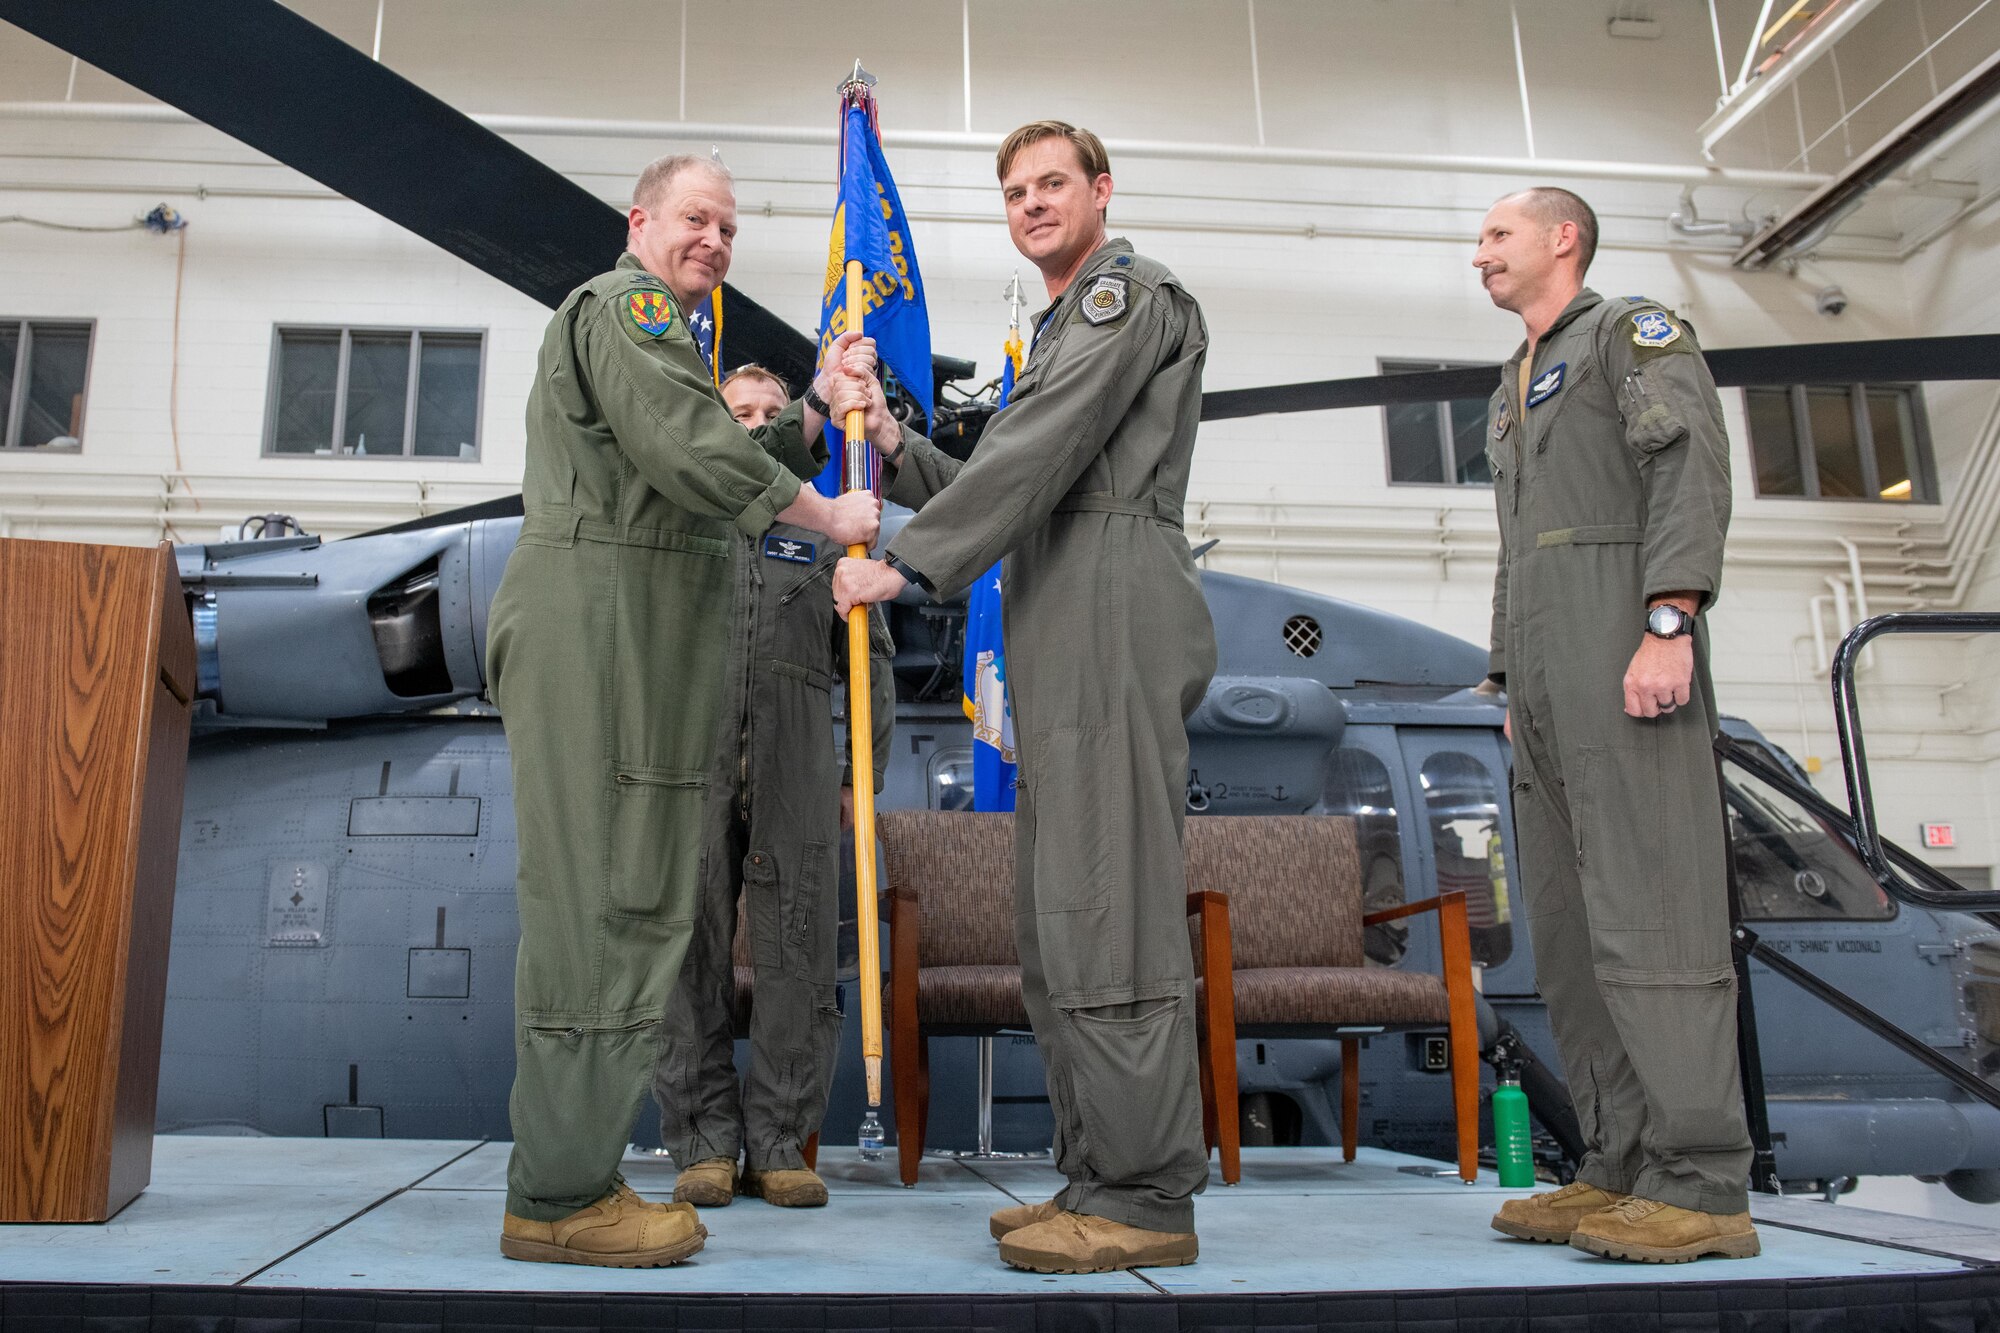 Colonel Jesse L. Hamilton, 943d Rescue Group commander, presents the guidon to Lt. Col. Brough L. McDonald as he assumes command of the 305th Rescue Squadron during a ceremony Aug. 5, 2022 at Davis-Monthan Air Force Base, Ariz. (U.S. Air Force photo by Senior Airman Nicole Koreen)